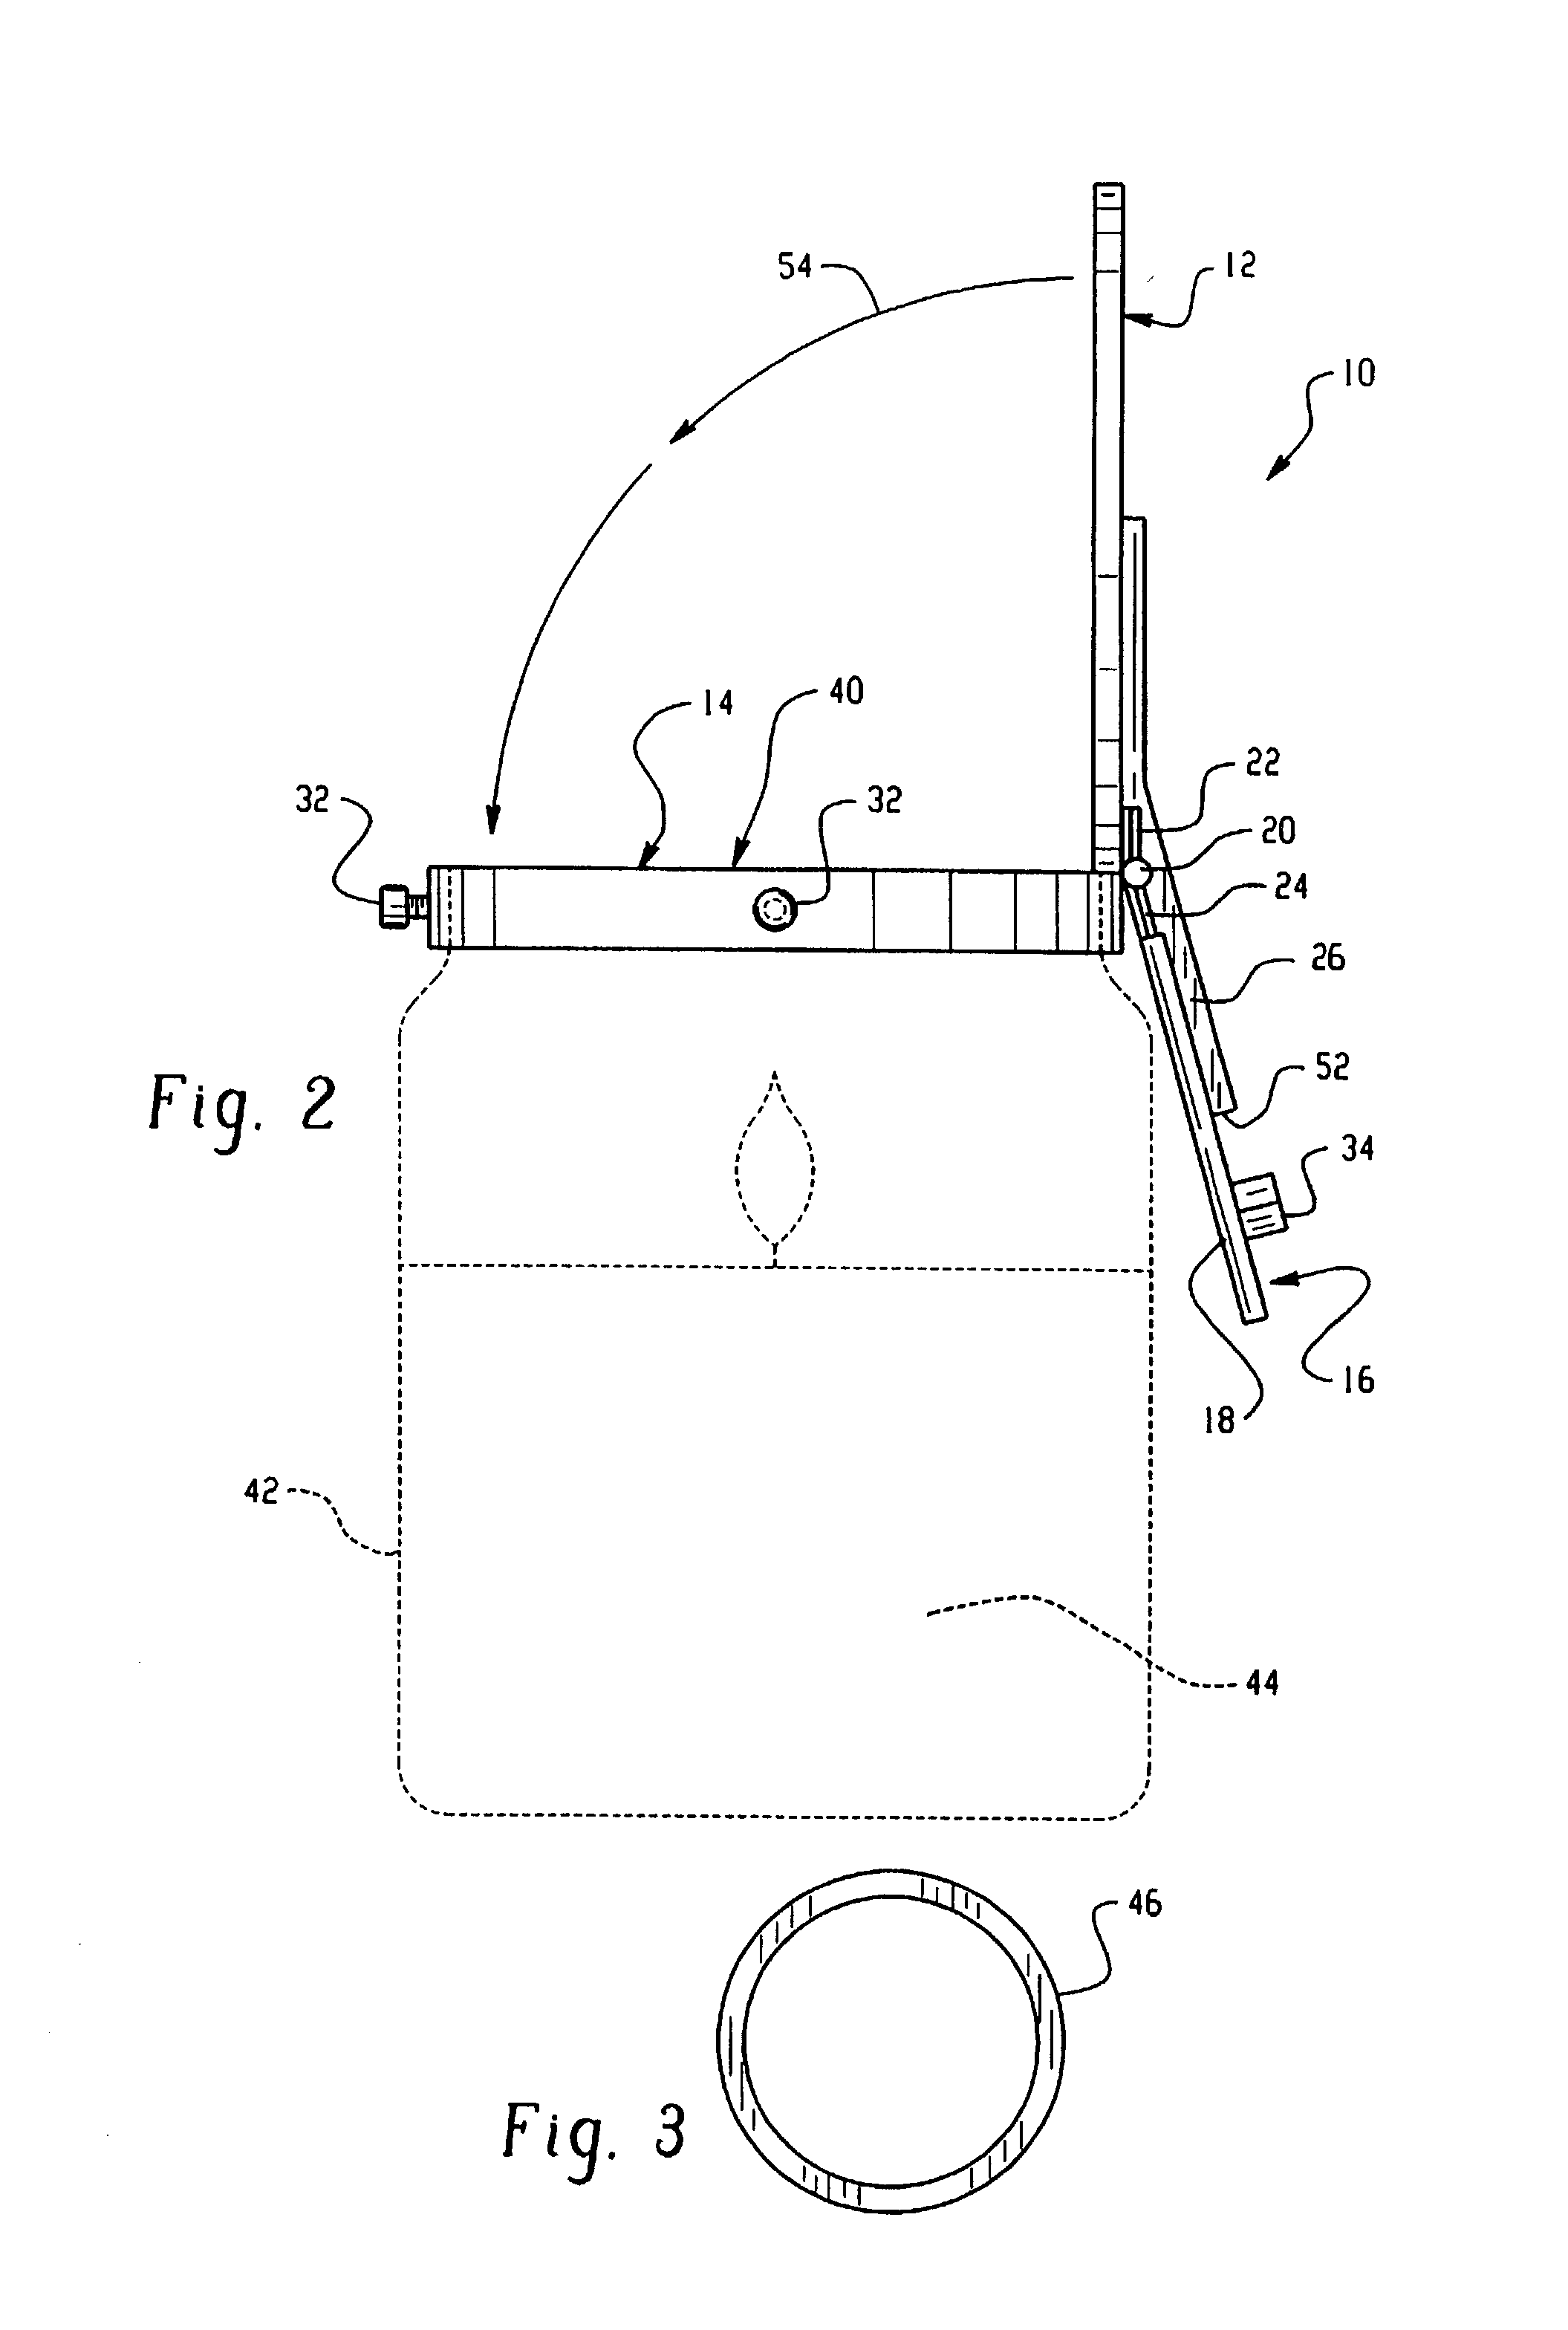 System and method to automatically extinguish a candle